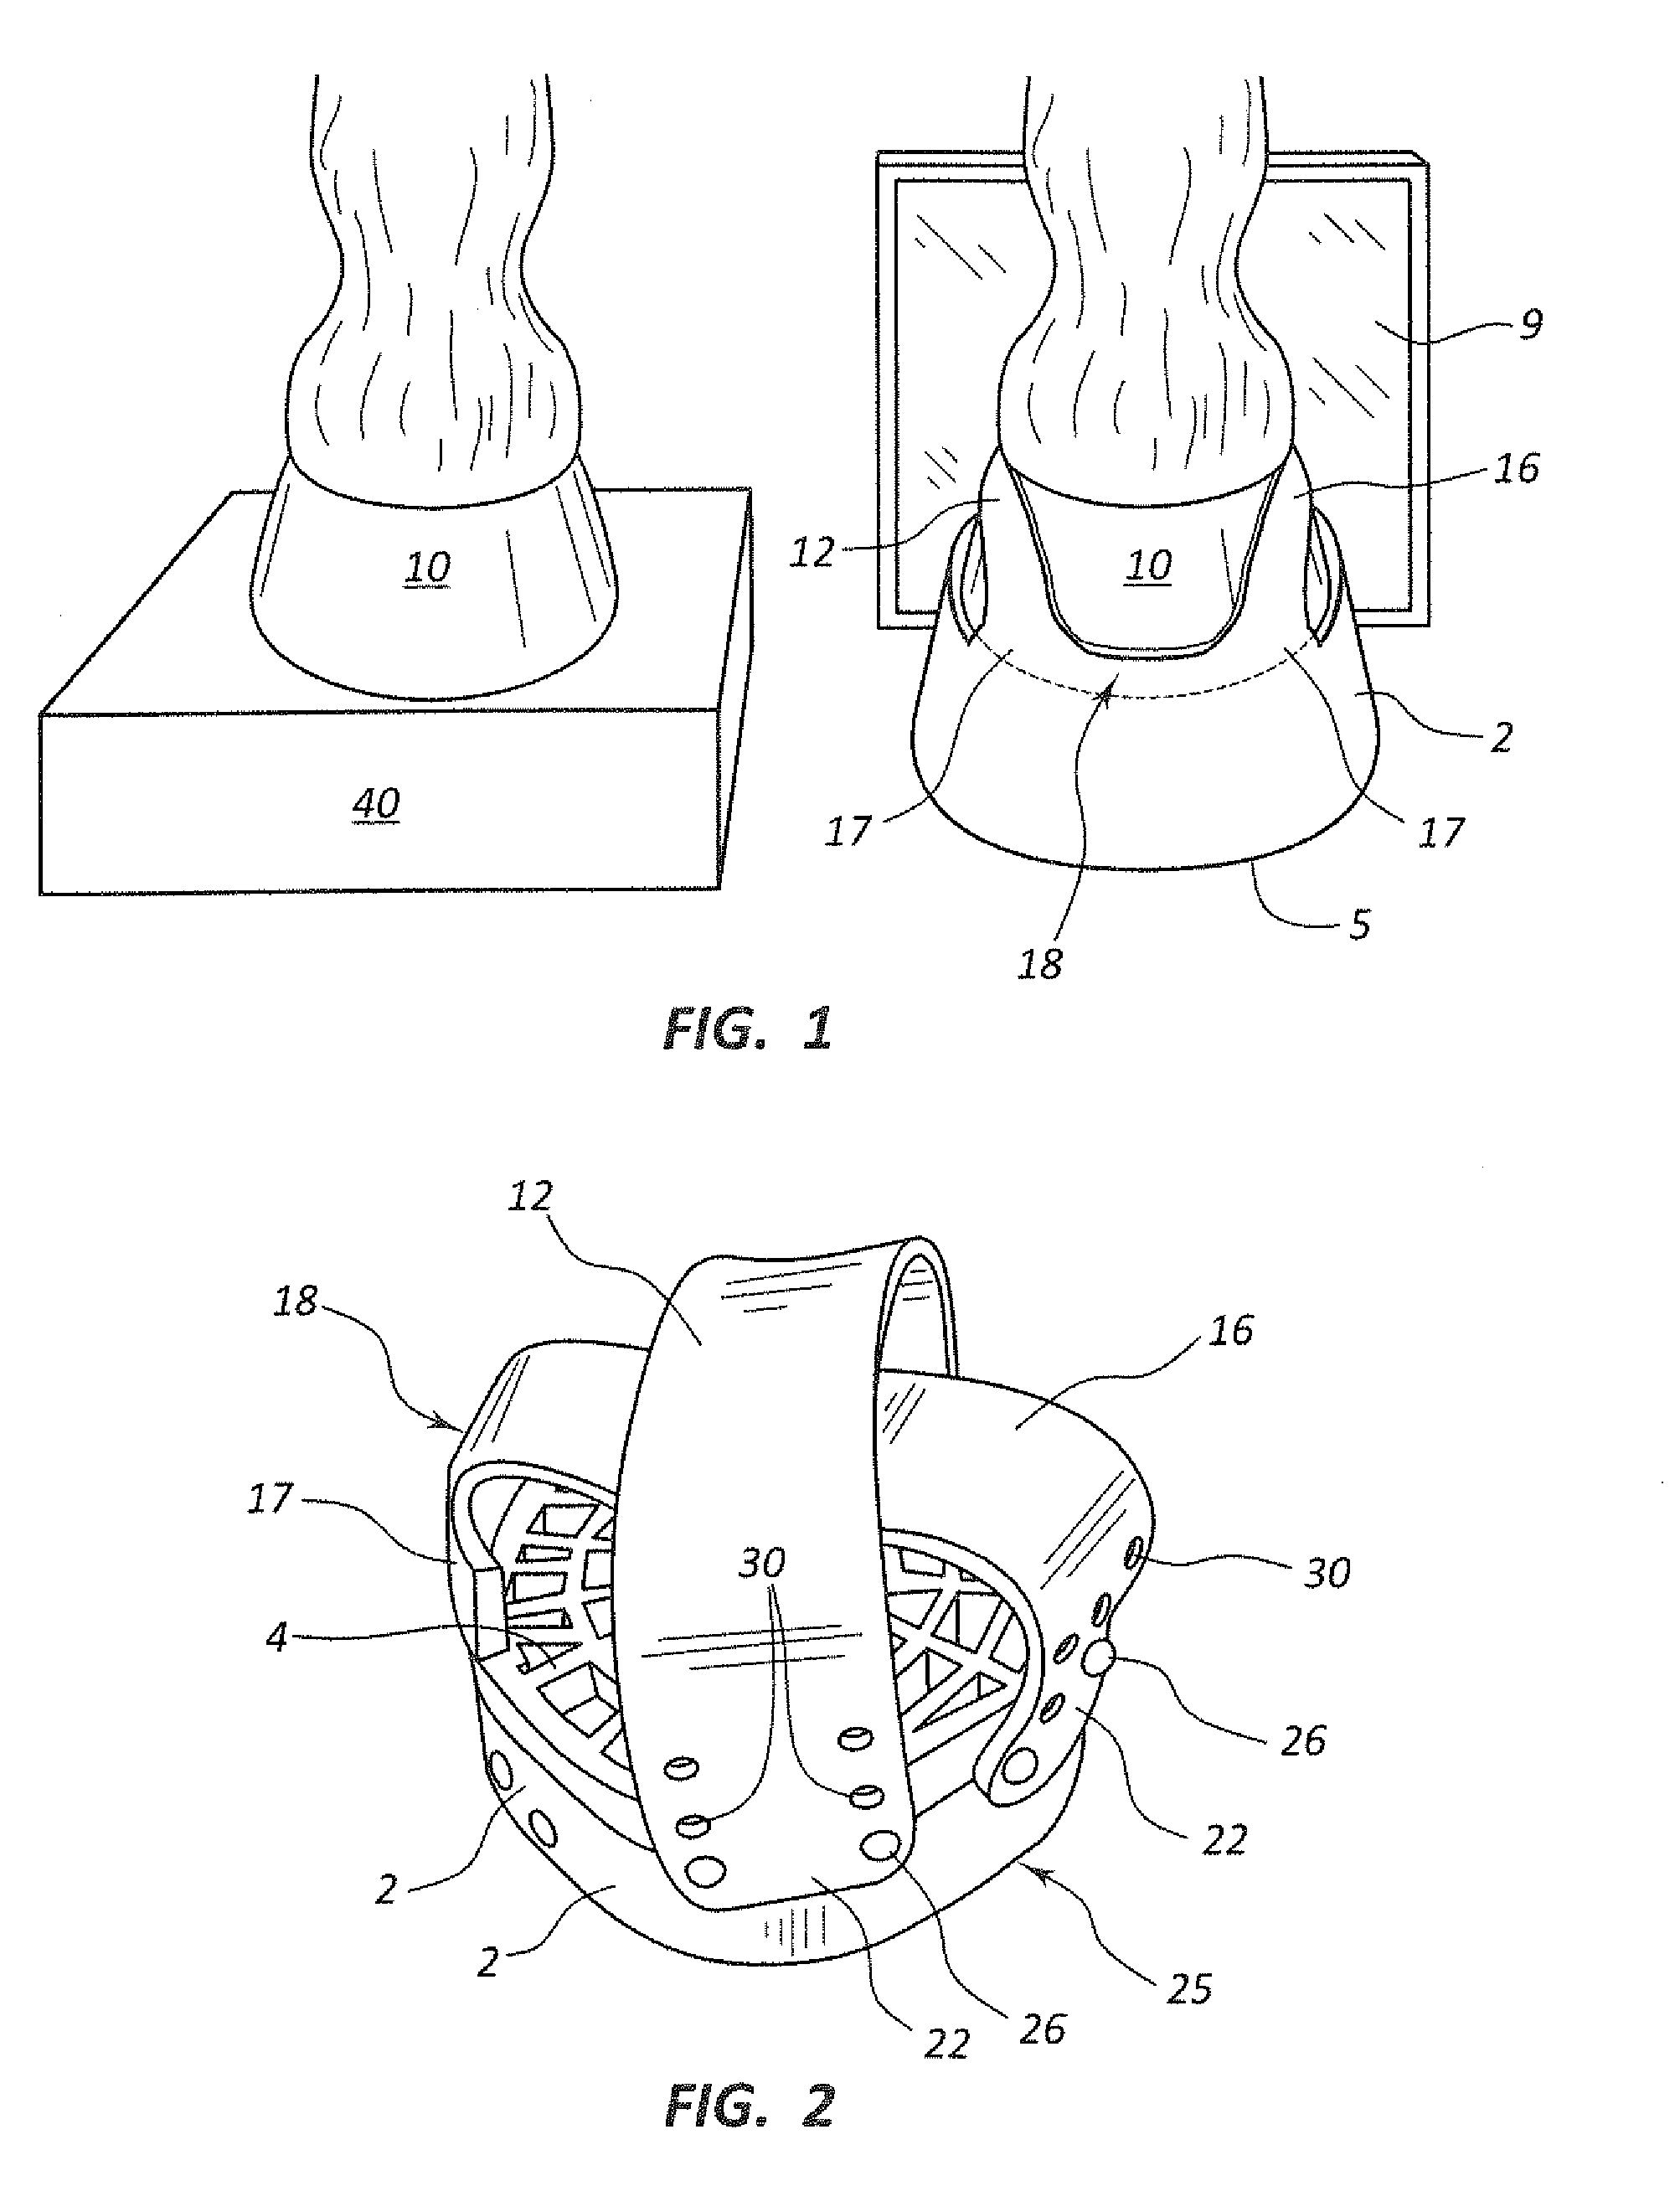 Method And Apparatus For Positioning A Horse's Foot For Radiographic Examination